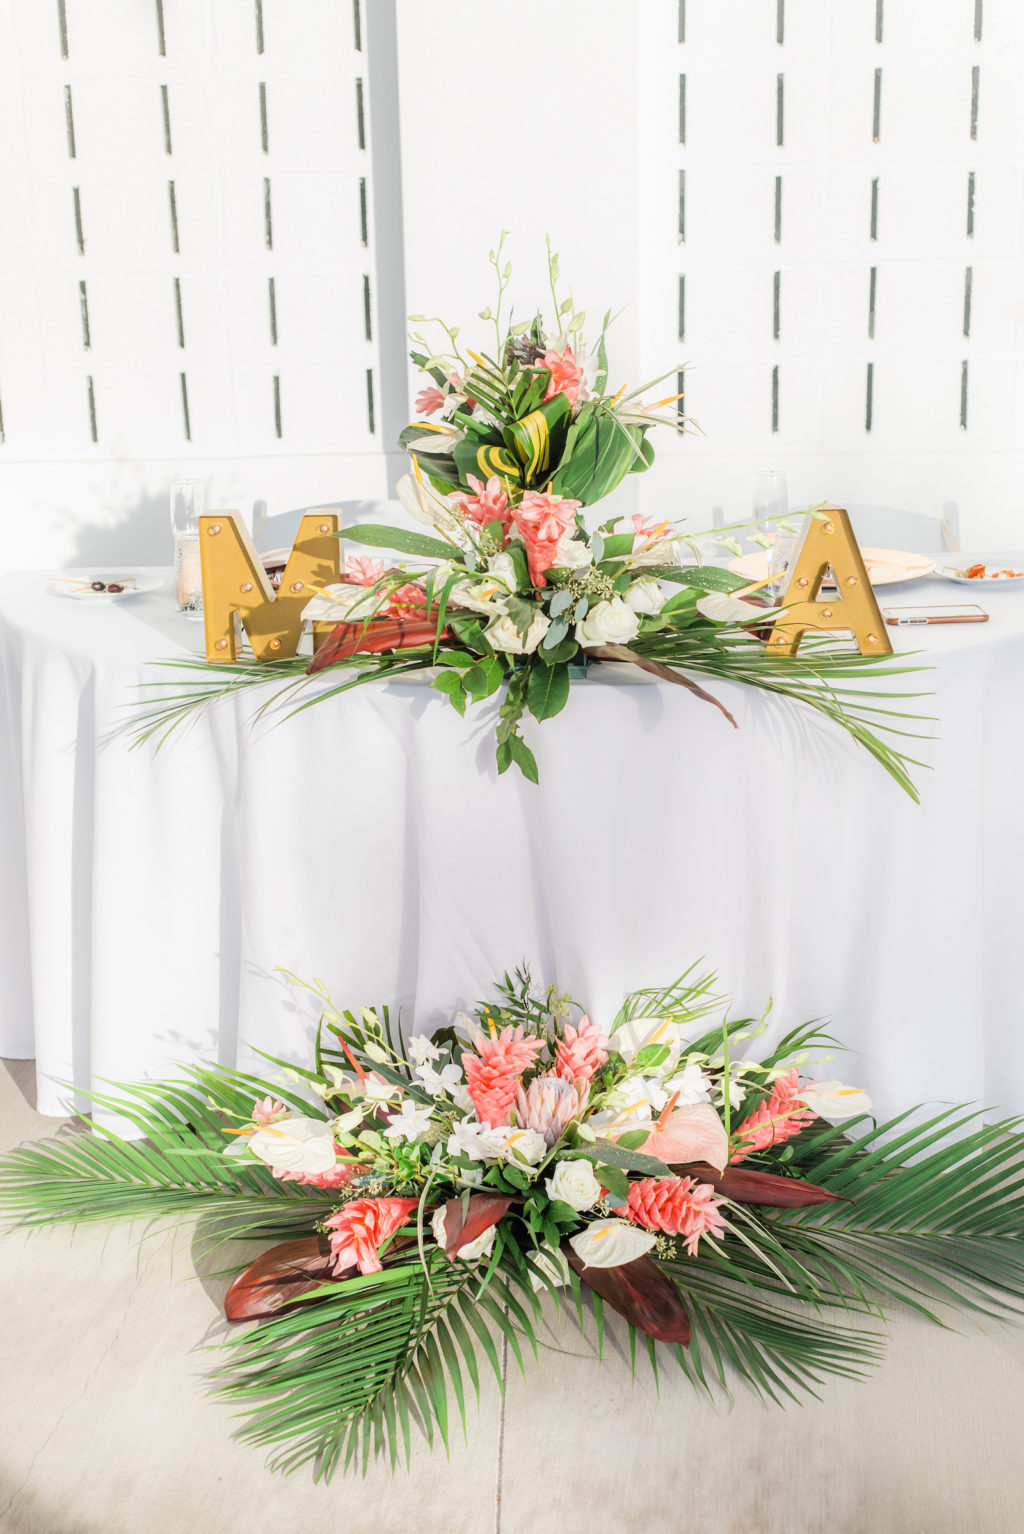 Elegant Tropical Wedding Reception Decor, Sweetheart Table with Gold Individual Letters, Floral Arrangements, Pink Ginger, Palm Fronds, White Orchids and Anthuriums | Tampa Bay Wedding Florist Iza's Flowers